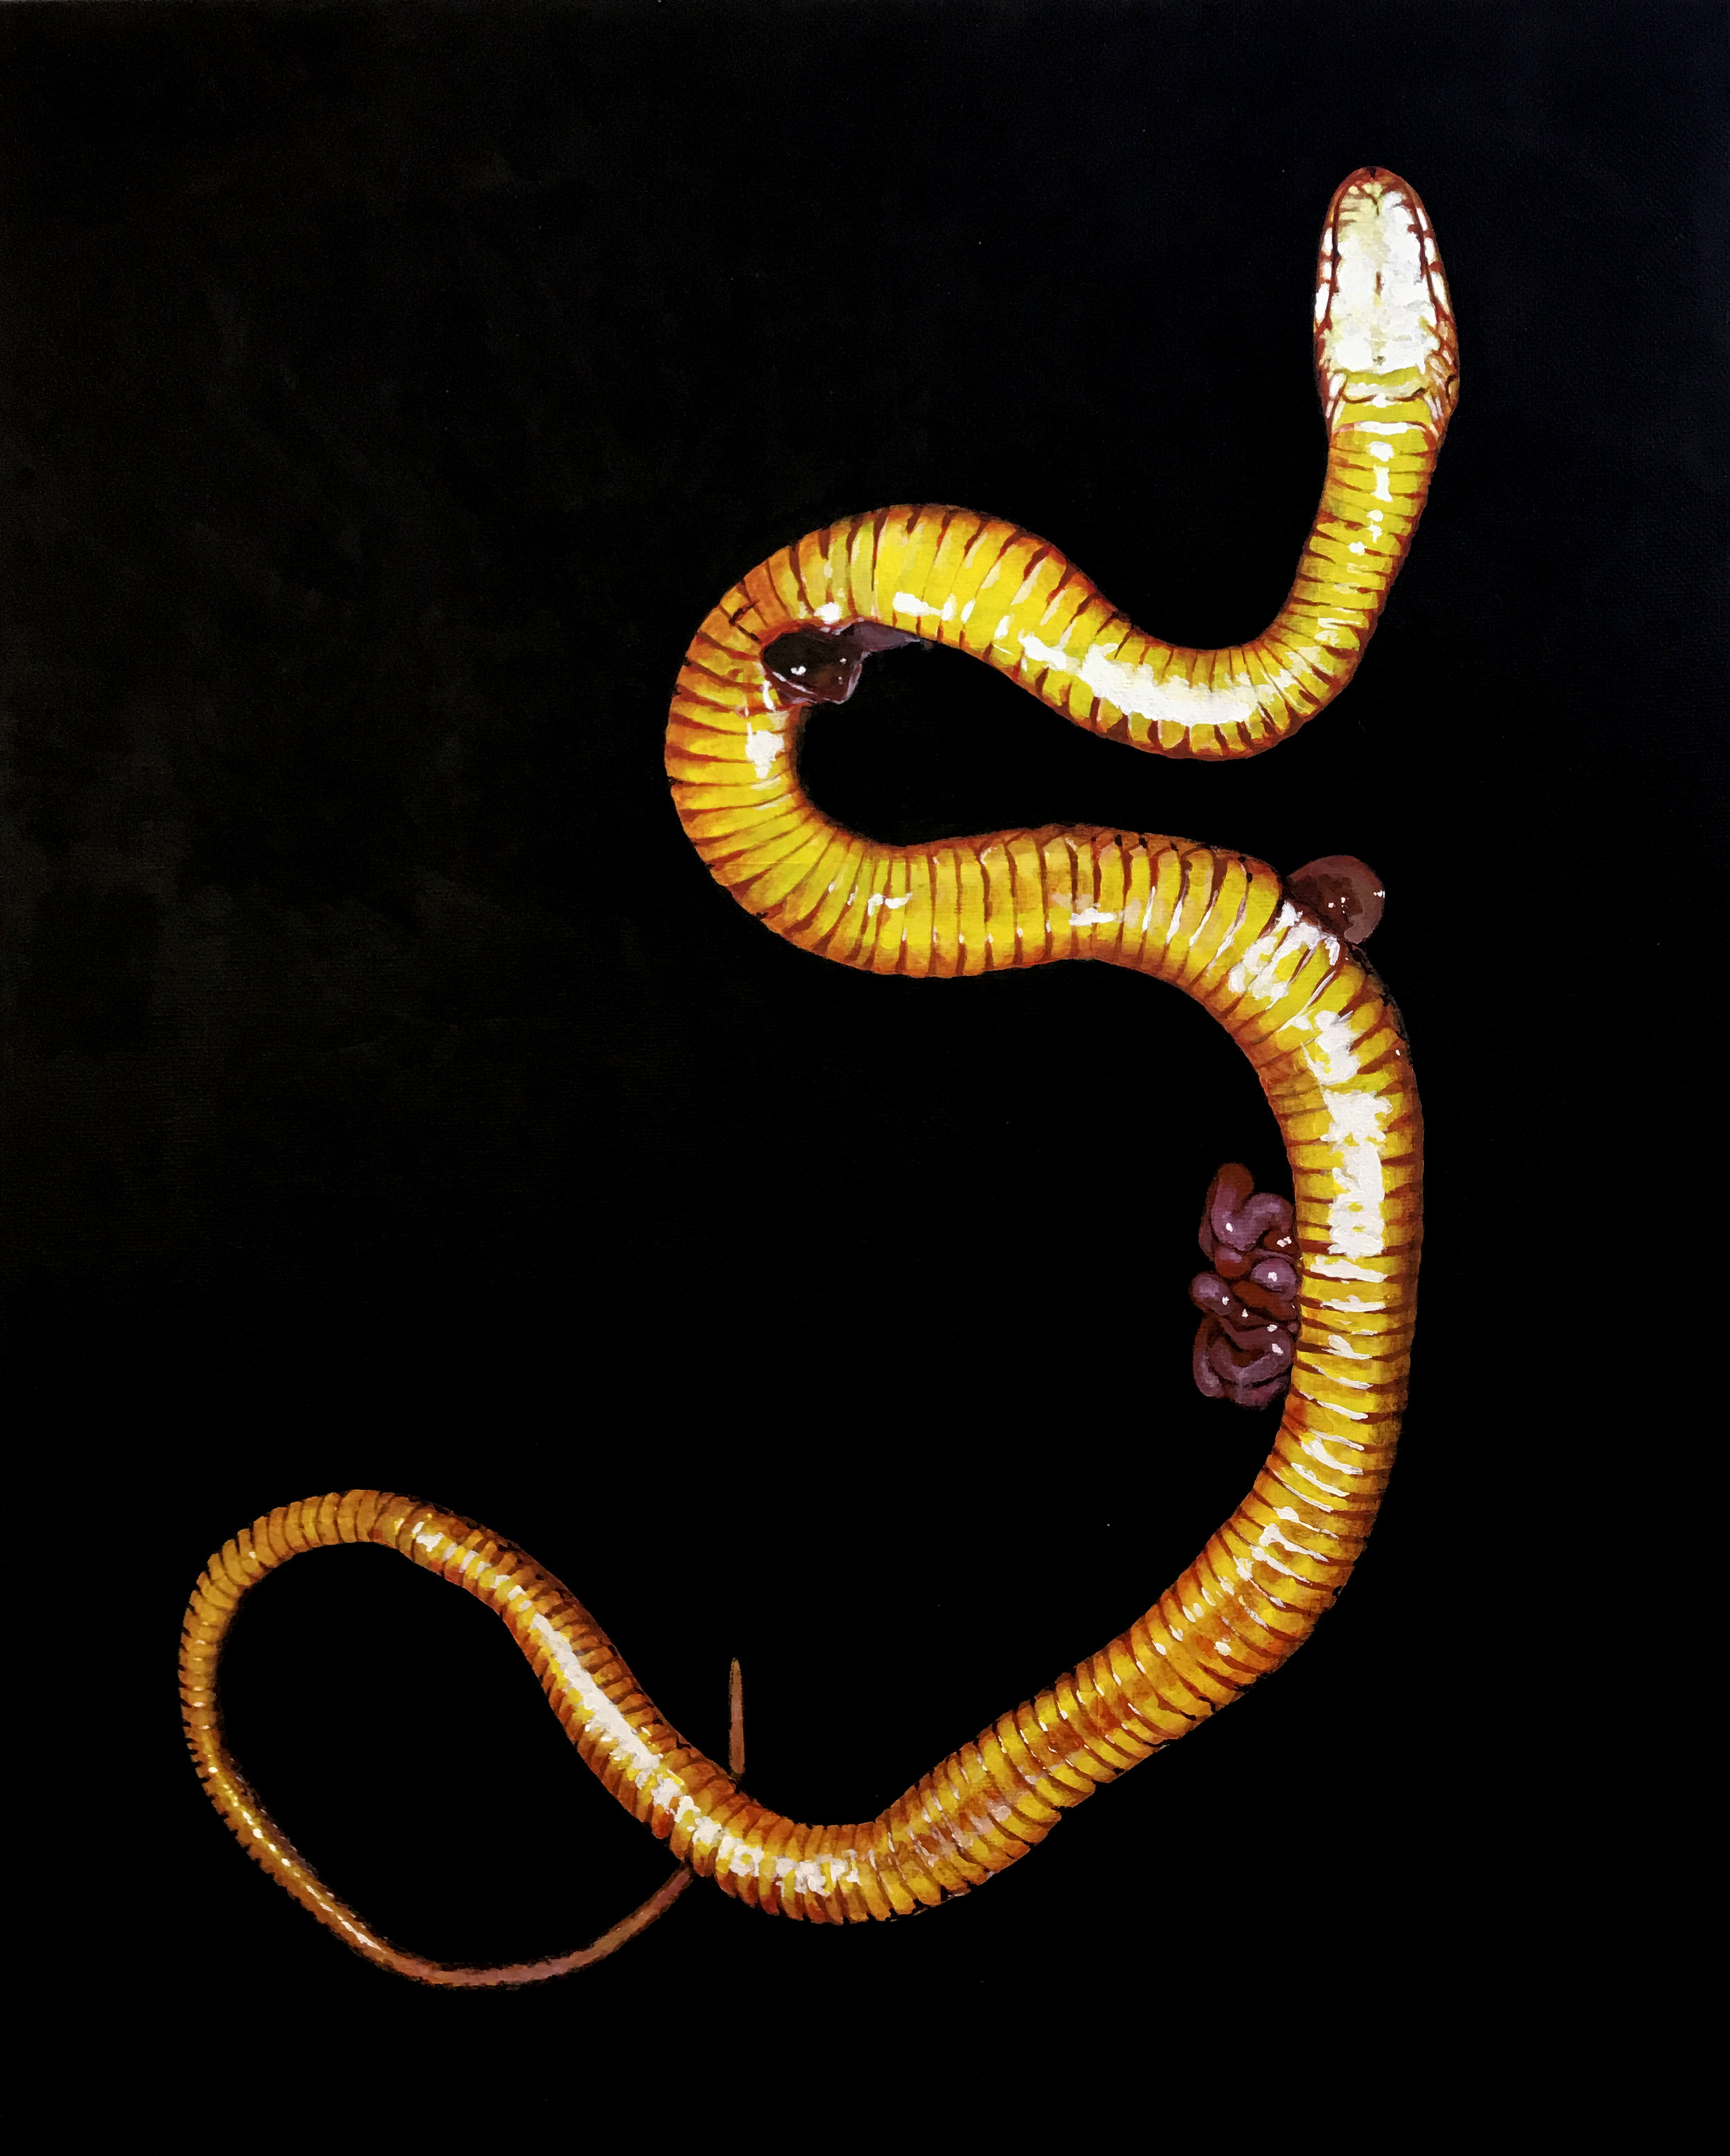   Yellow bellied racer (Multiple fatal internal and external traumas due to motor vehicle collision, Austin, TX 2017), vinyl paint on canvas  